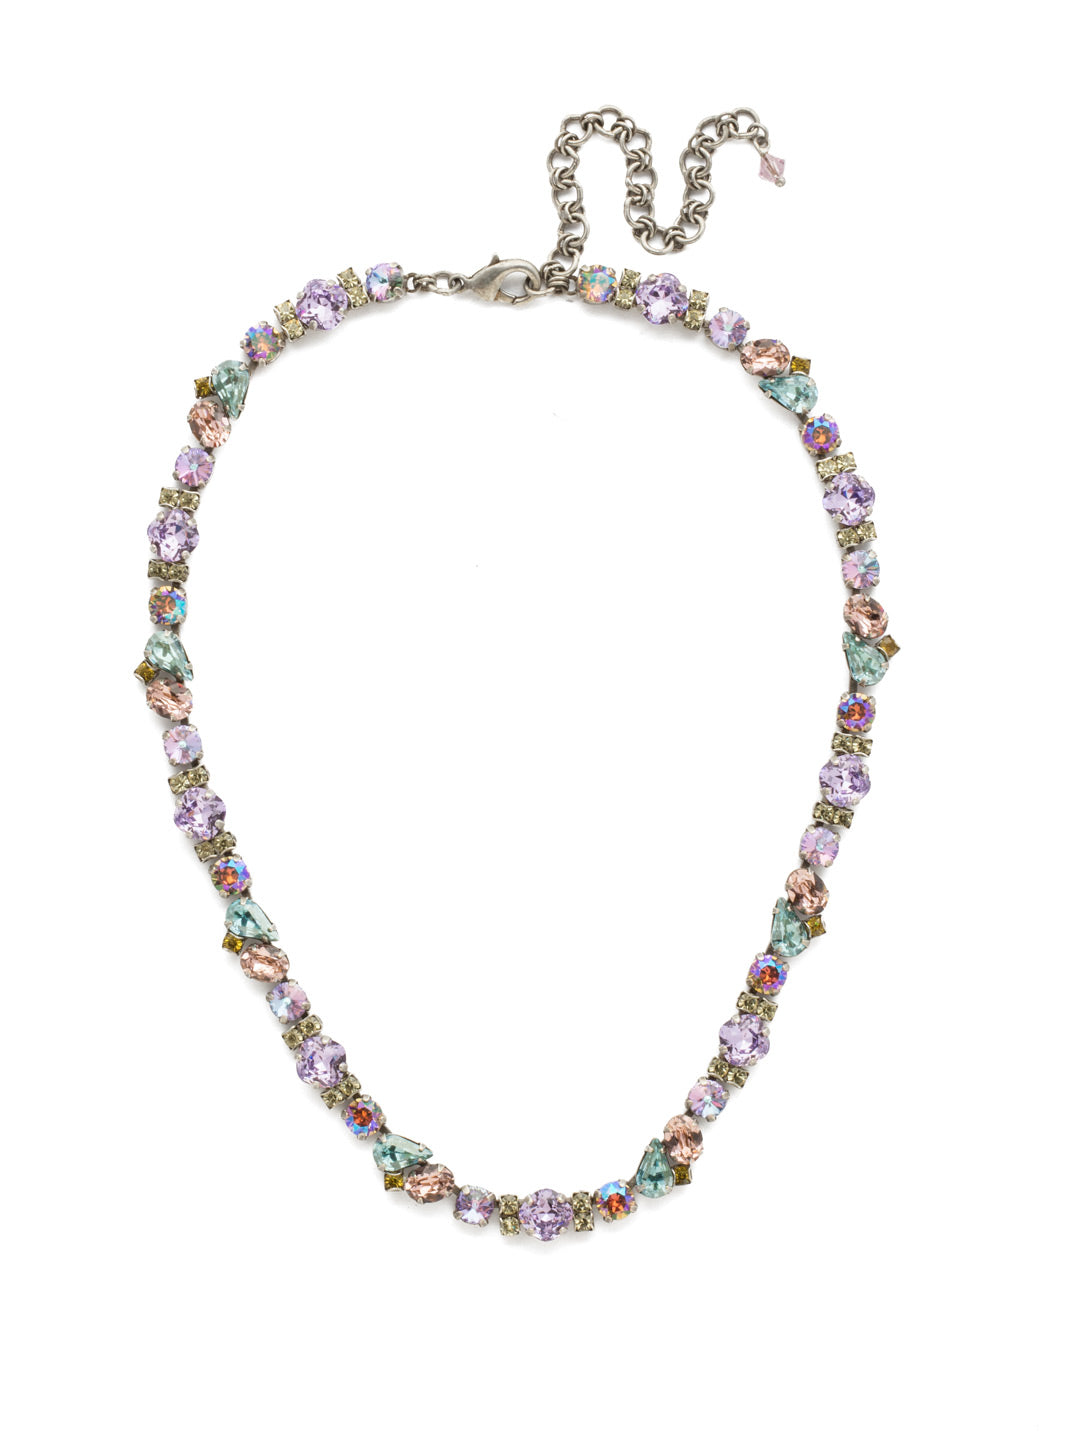 Daffodil Necklace Tennis Necklace - NDU5ASLPA - Emphasizes a thick collection of pear, round, and oval shaped clusters secured by a lobster claw clasp to complete the style. From Sorrelli's Lilac Pastel collection in our Antique Silver-tone finish.